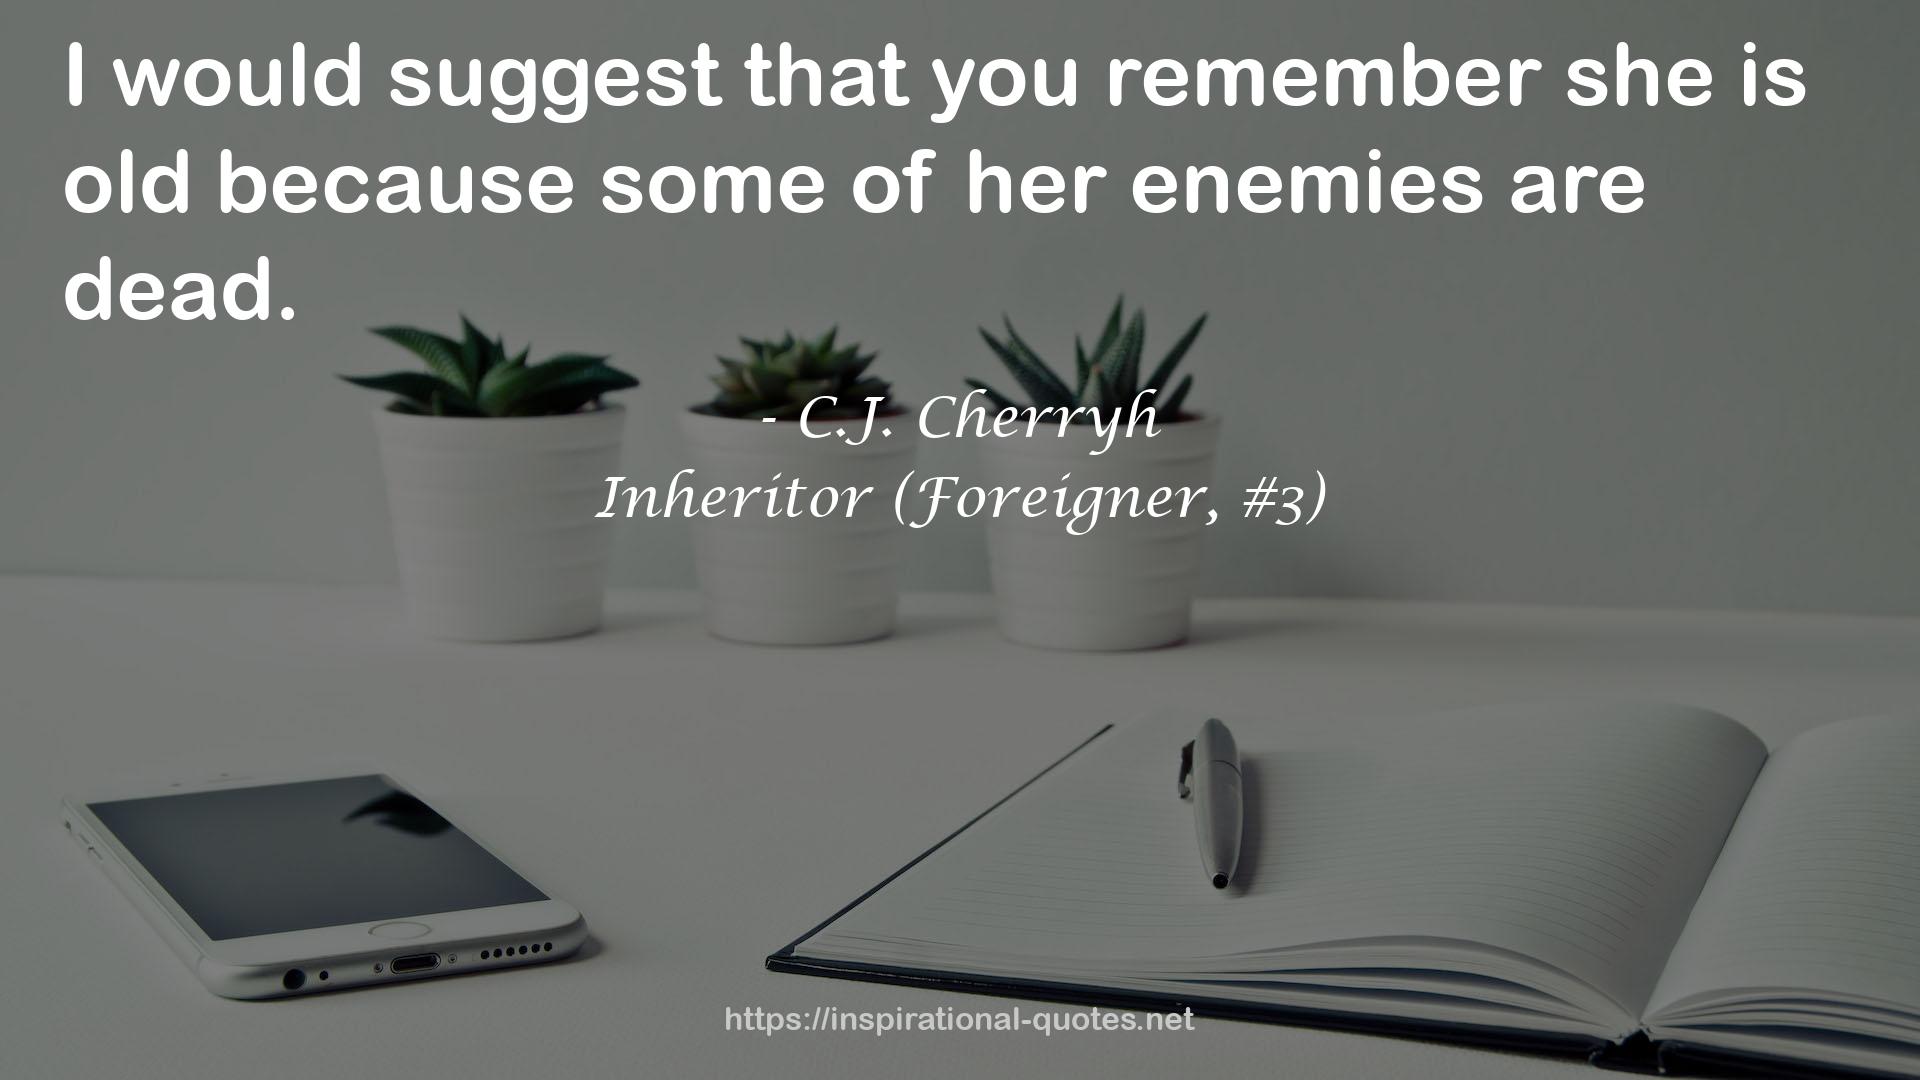 Inheritor (Foreigner, #3) QUOTES